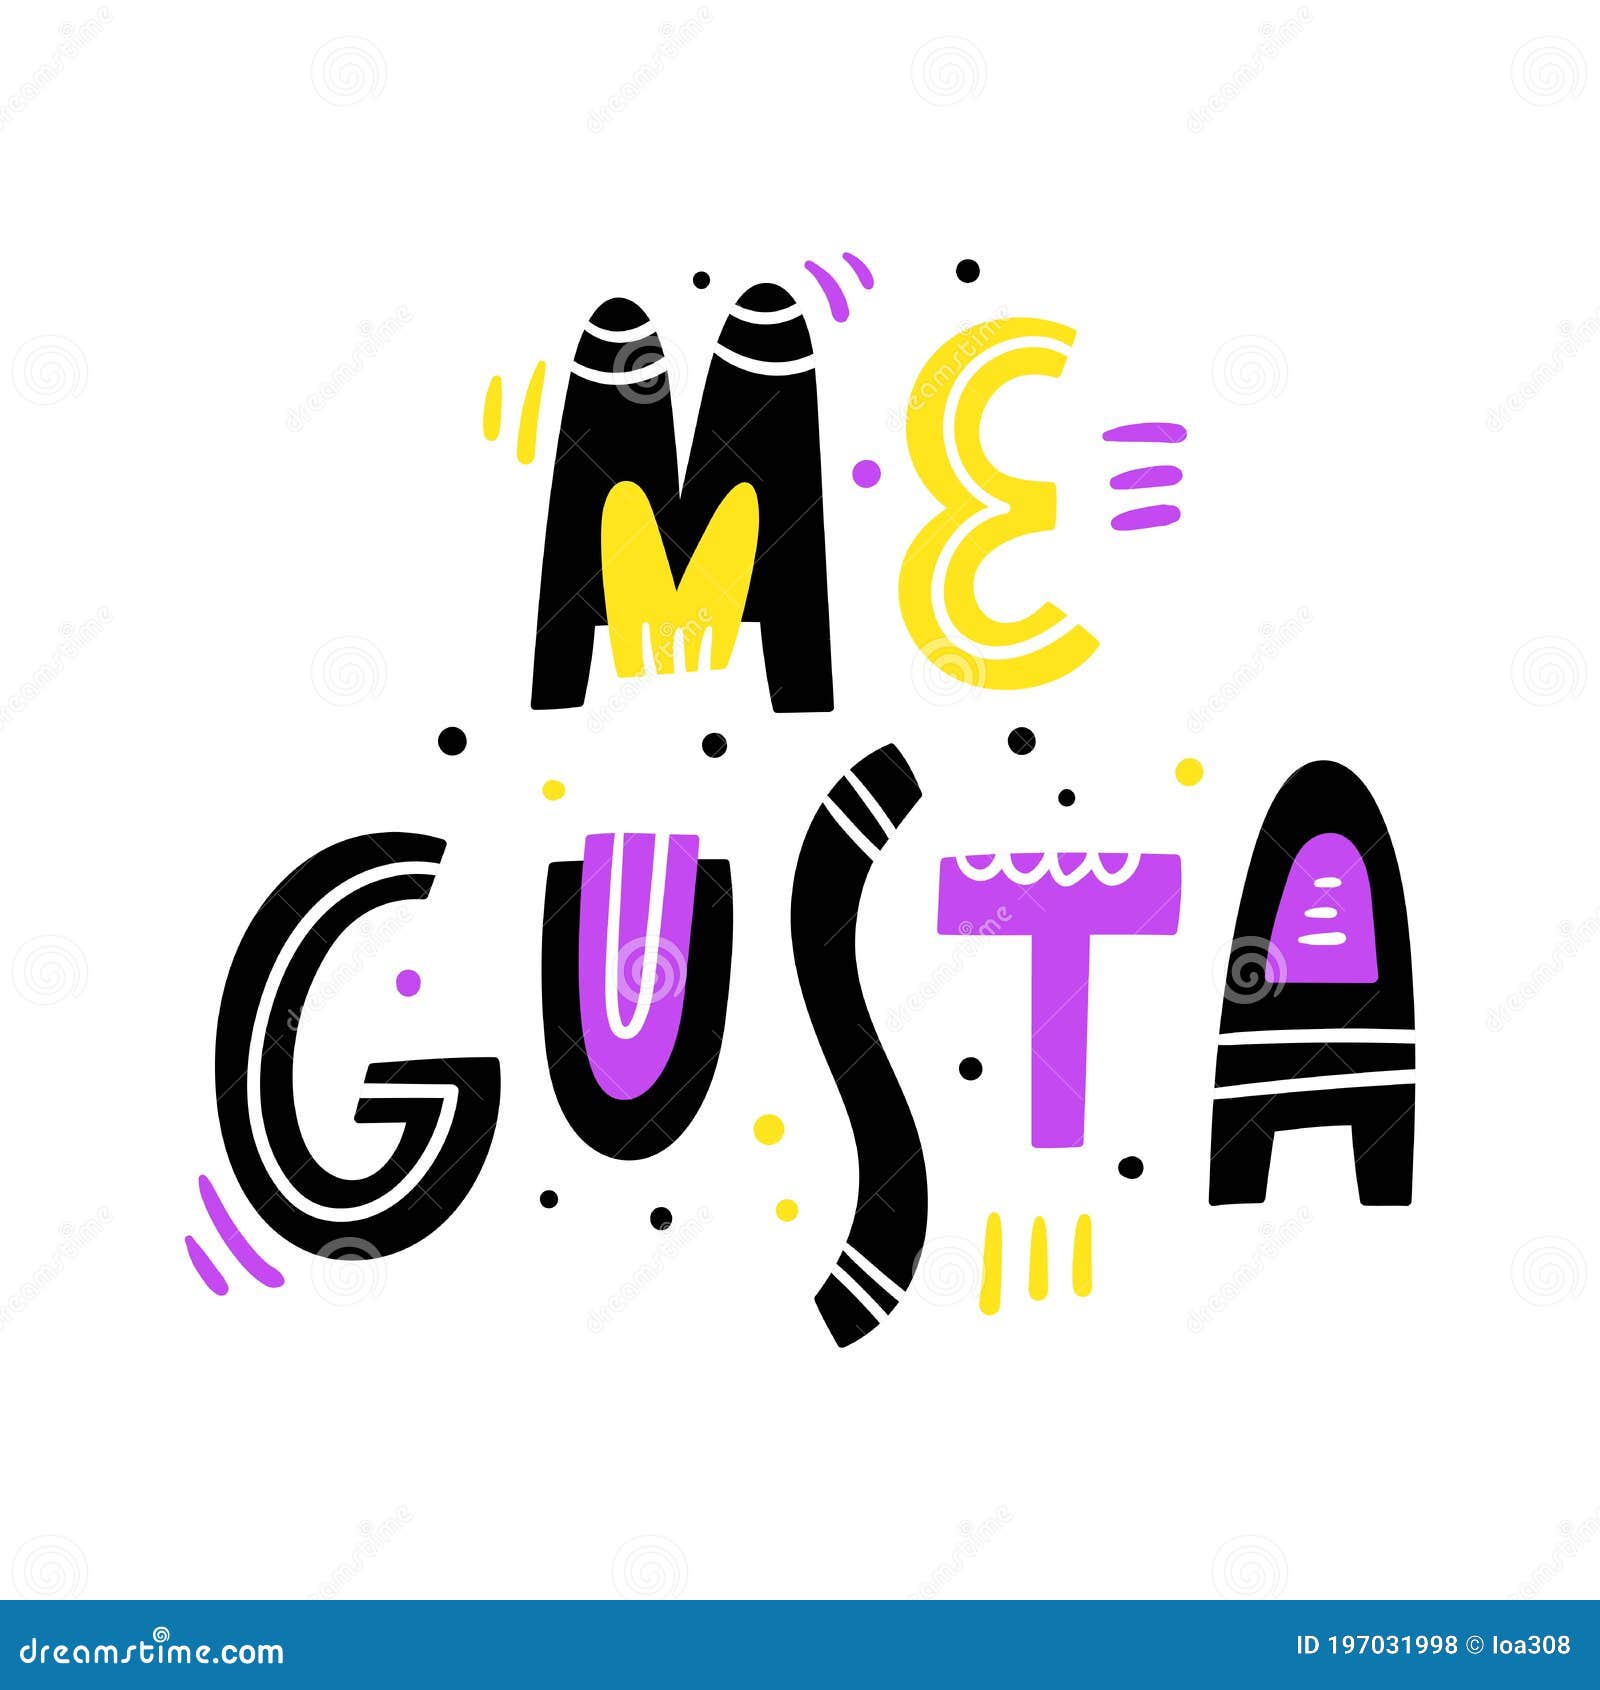 me gusta in spanish i like it - hand drawn modern lettering